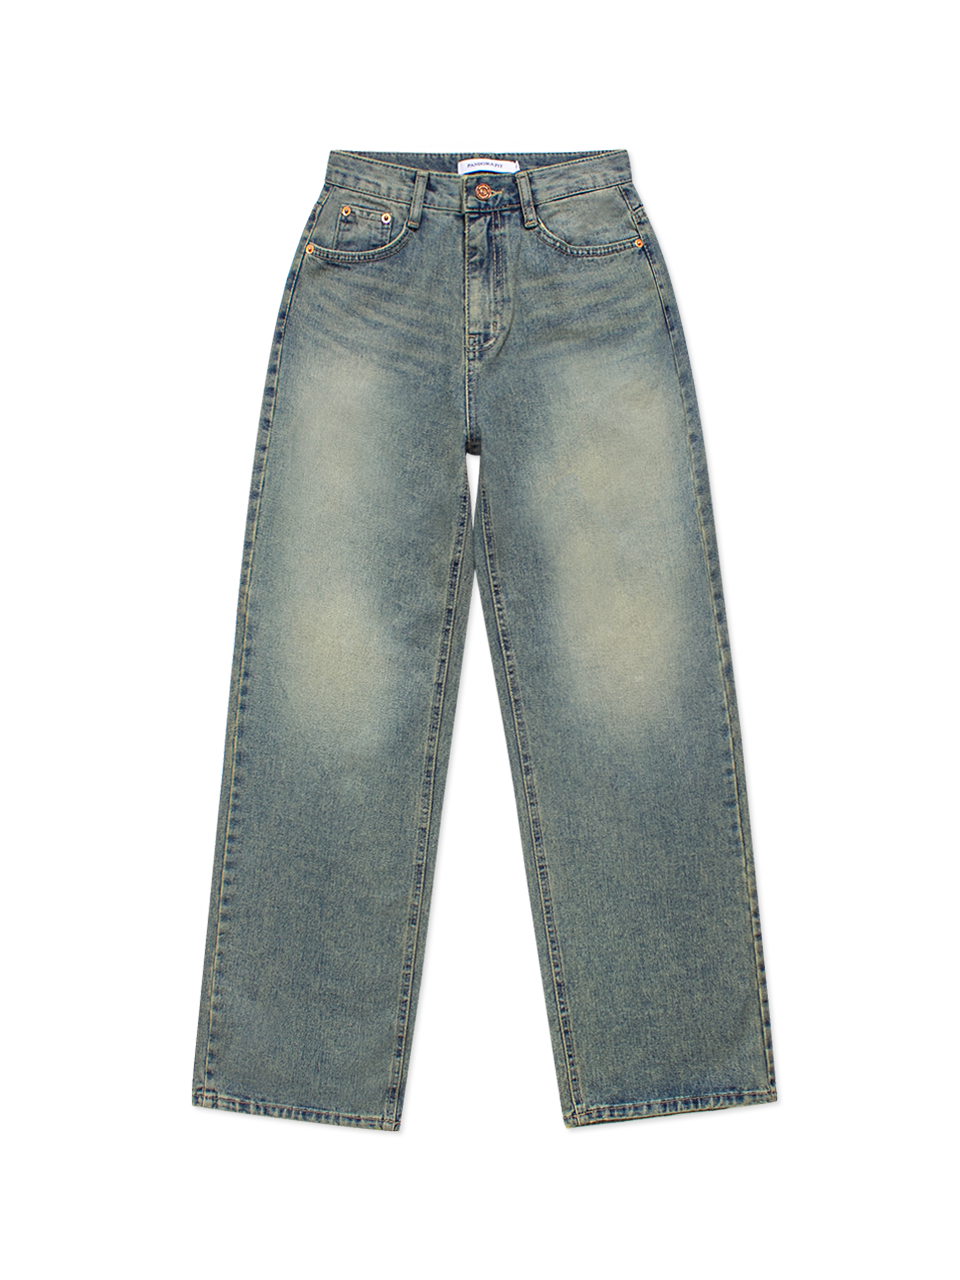 [WIDE] Armad Jeans